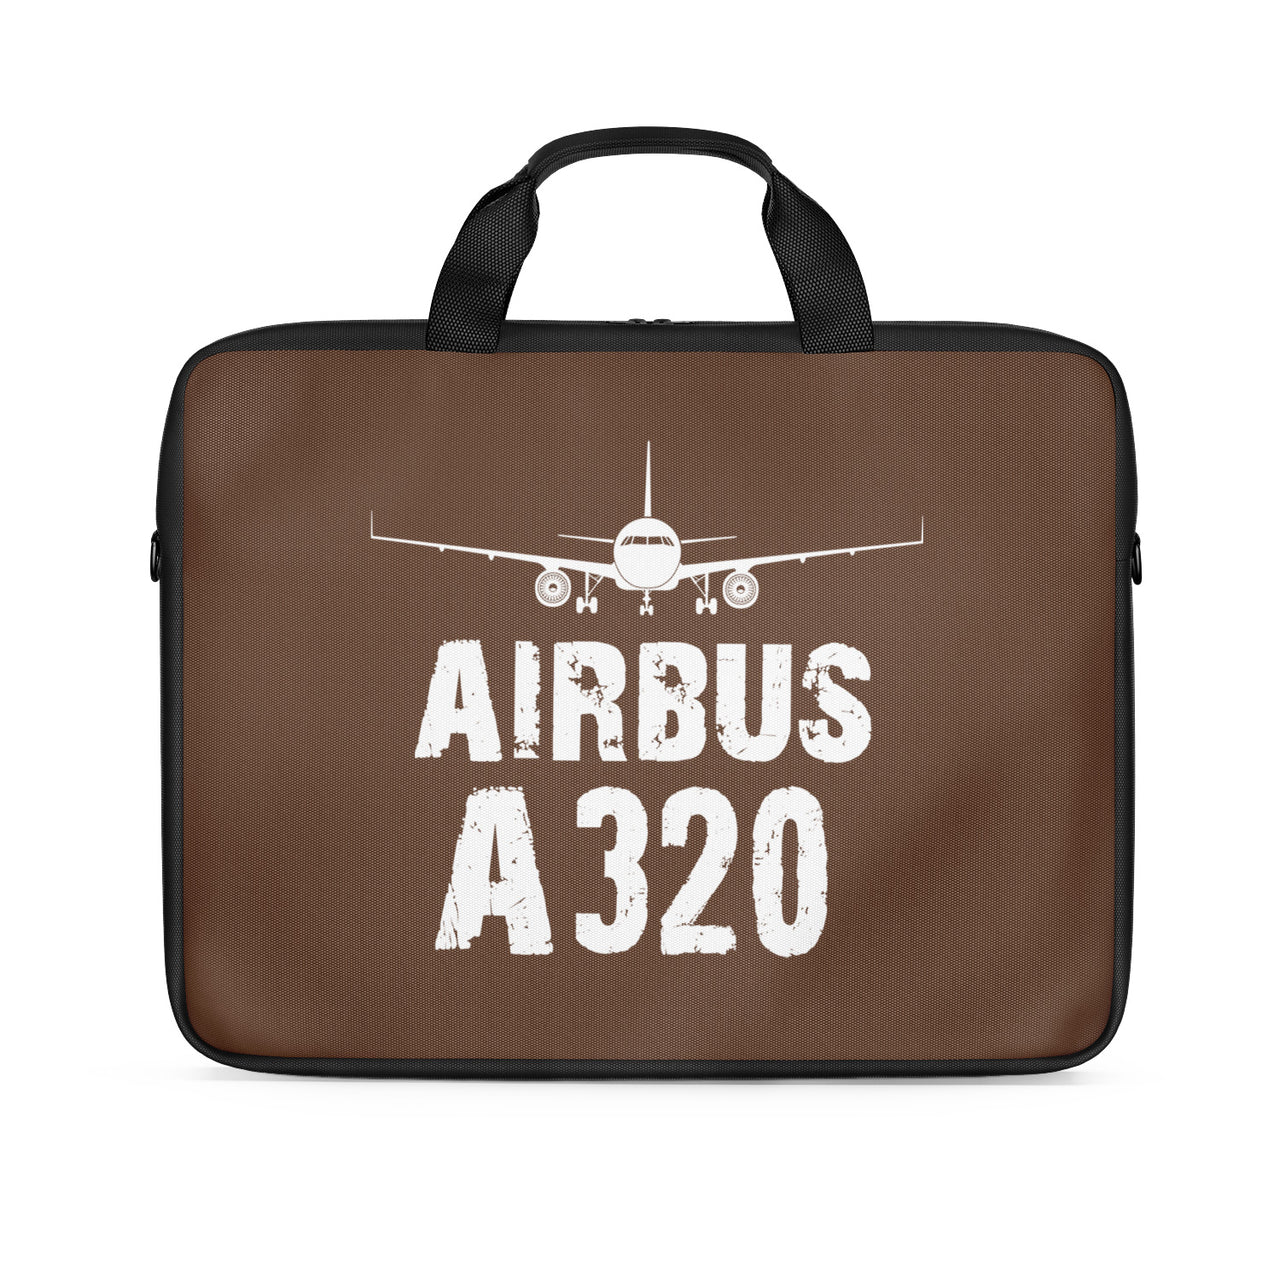 Airbus A320 & Plane Designed Laptop & Tablet Bags